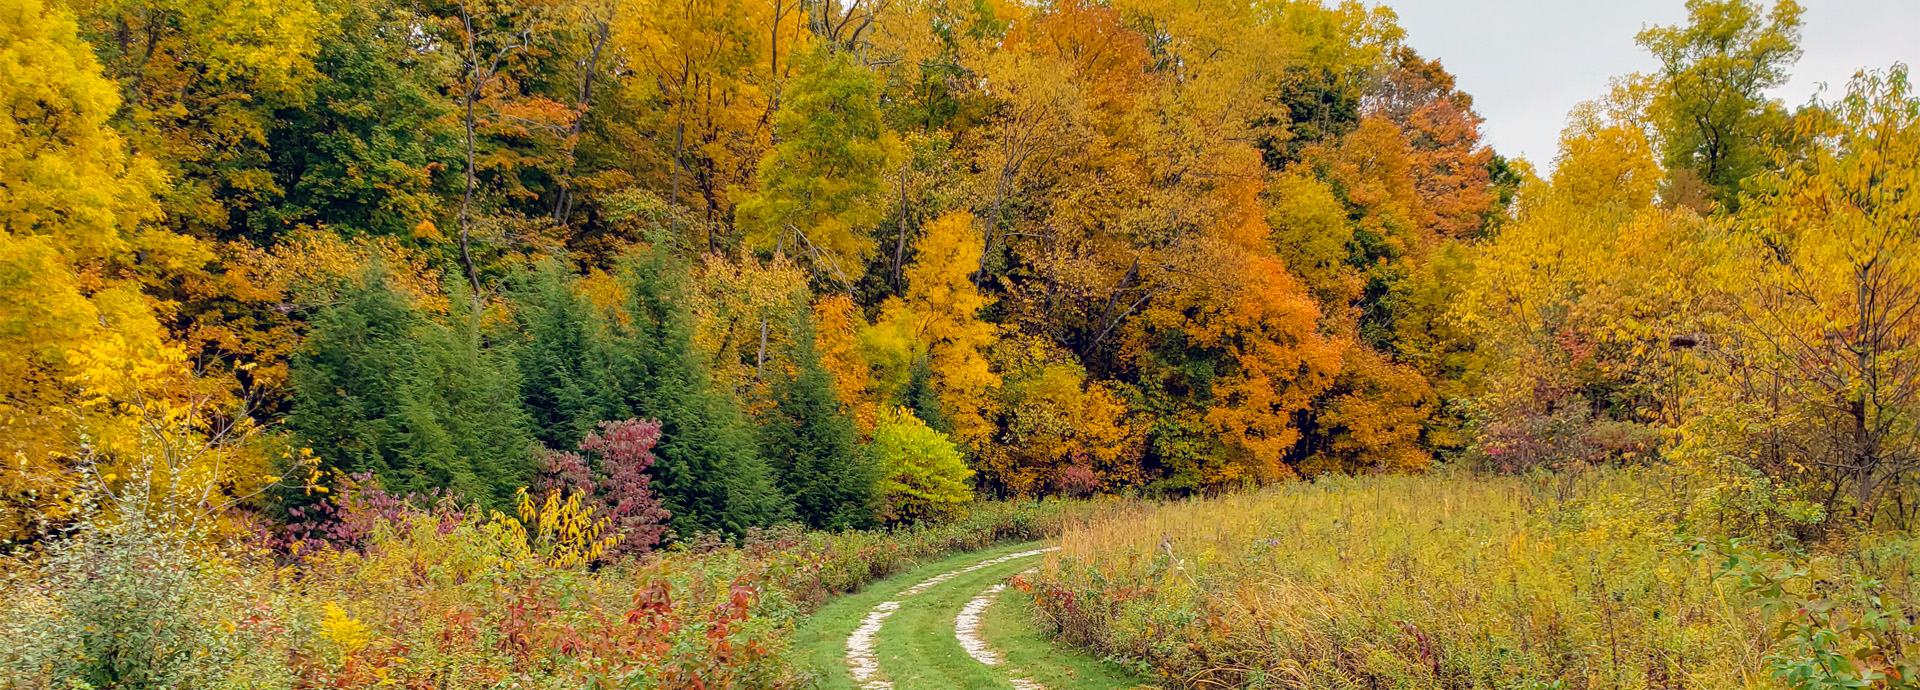 Slideshow Image - A driveway surrounded by grasses and trees in vibrant fall colors